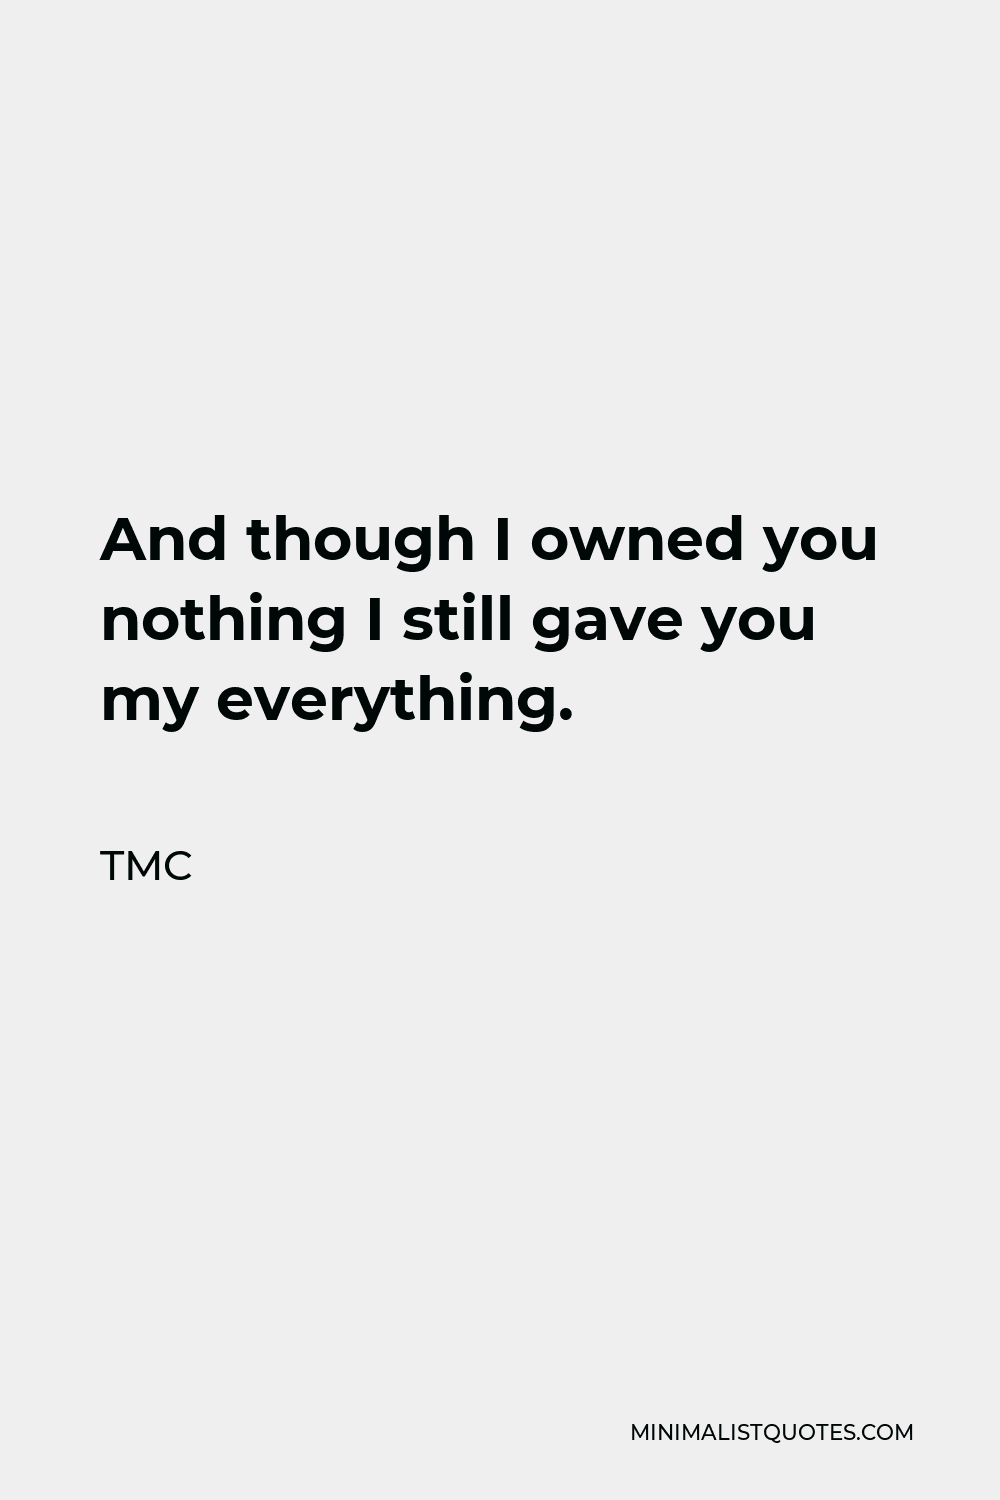 TMC Quote - And though I owned you nothing I still gave you my everything.